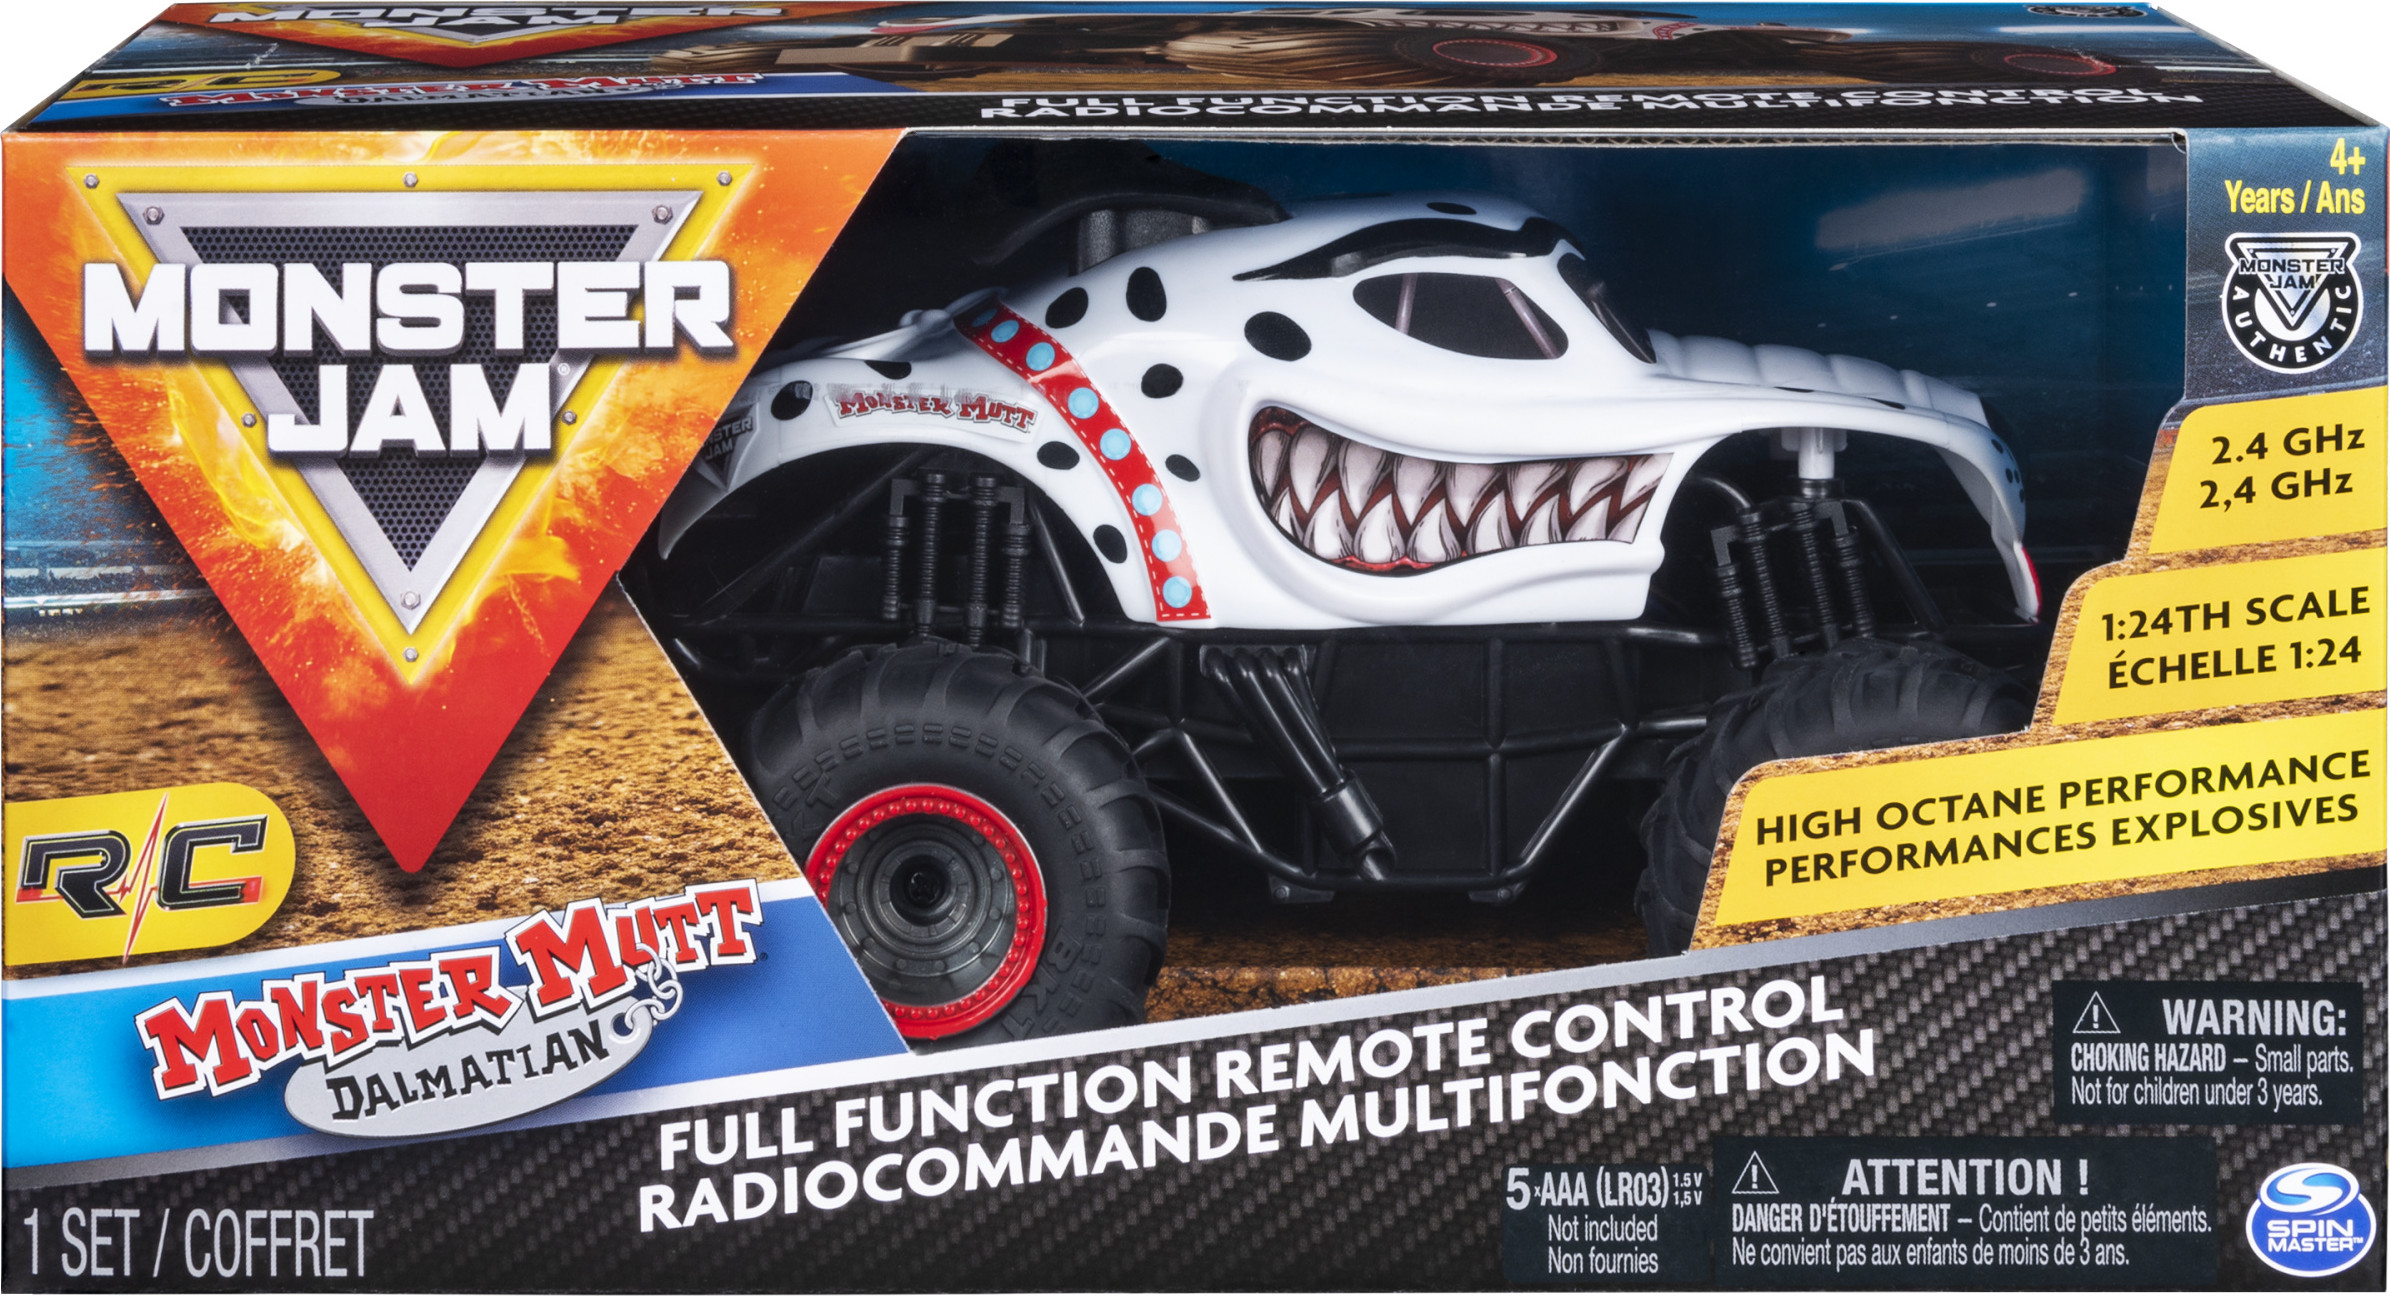 Monster Jam, Official Monster Mutt Dalmatian Remote Control Monster Truck, 1:24 Scale, 2.4 GHz, for Ages 4 and Up - image 2 of 6